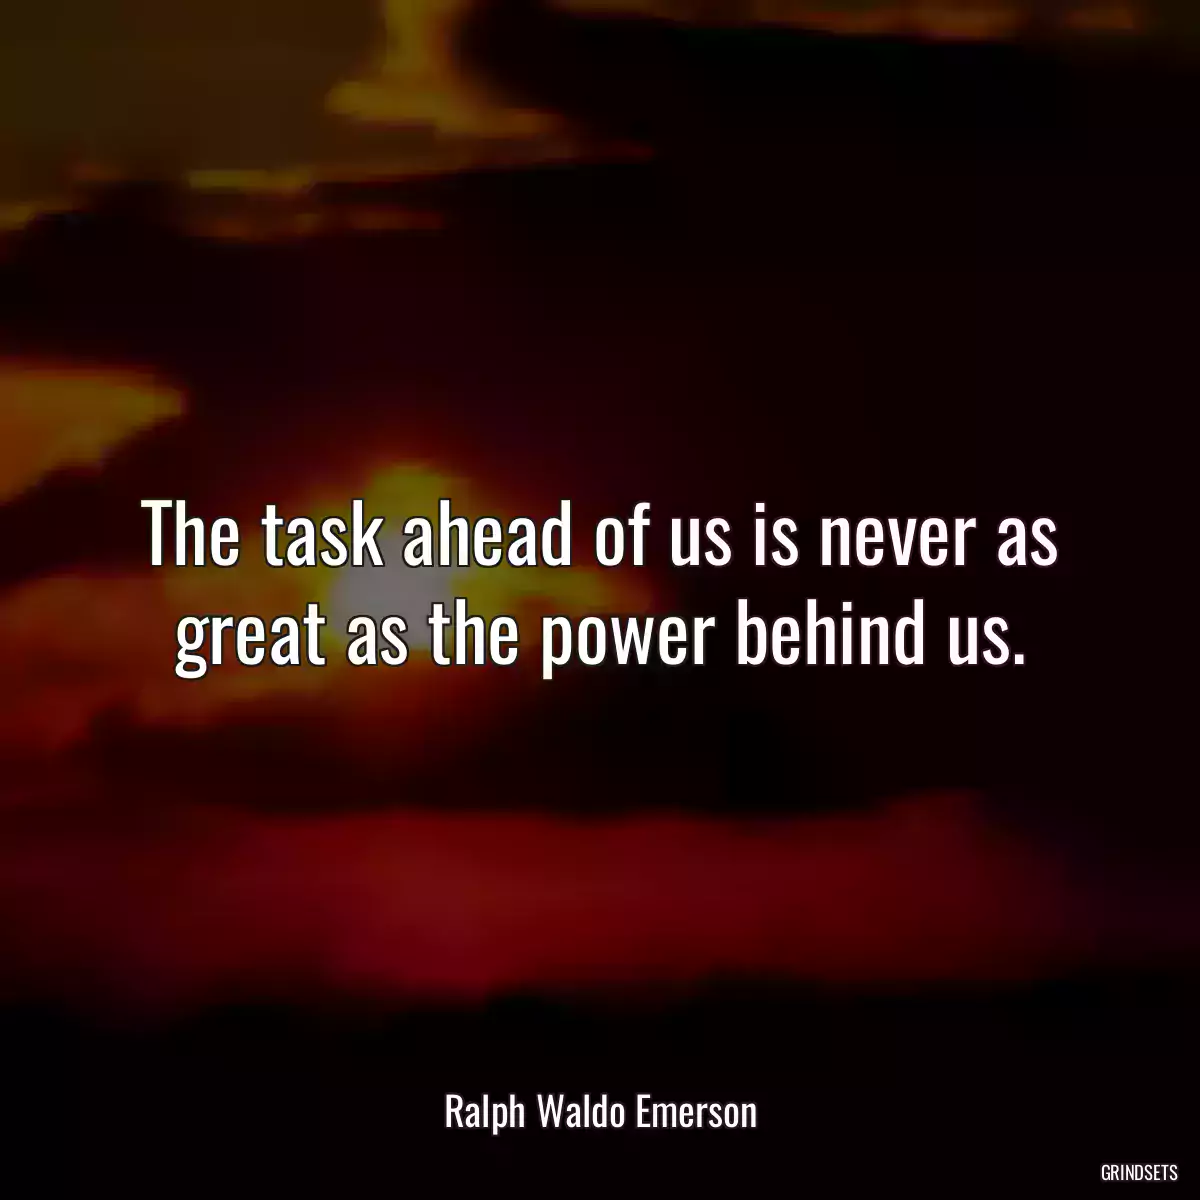 The task ahead of us is never as great as the power behind us.